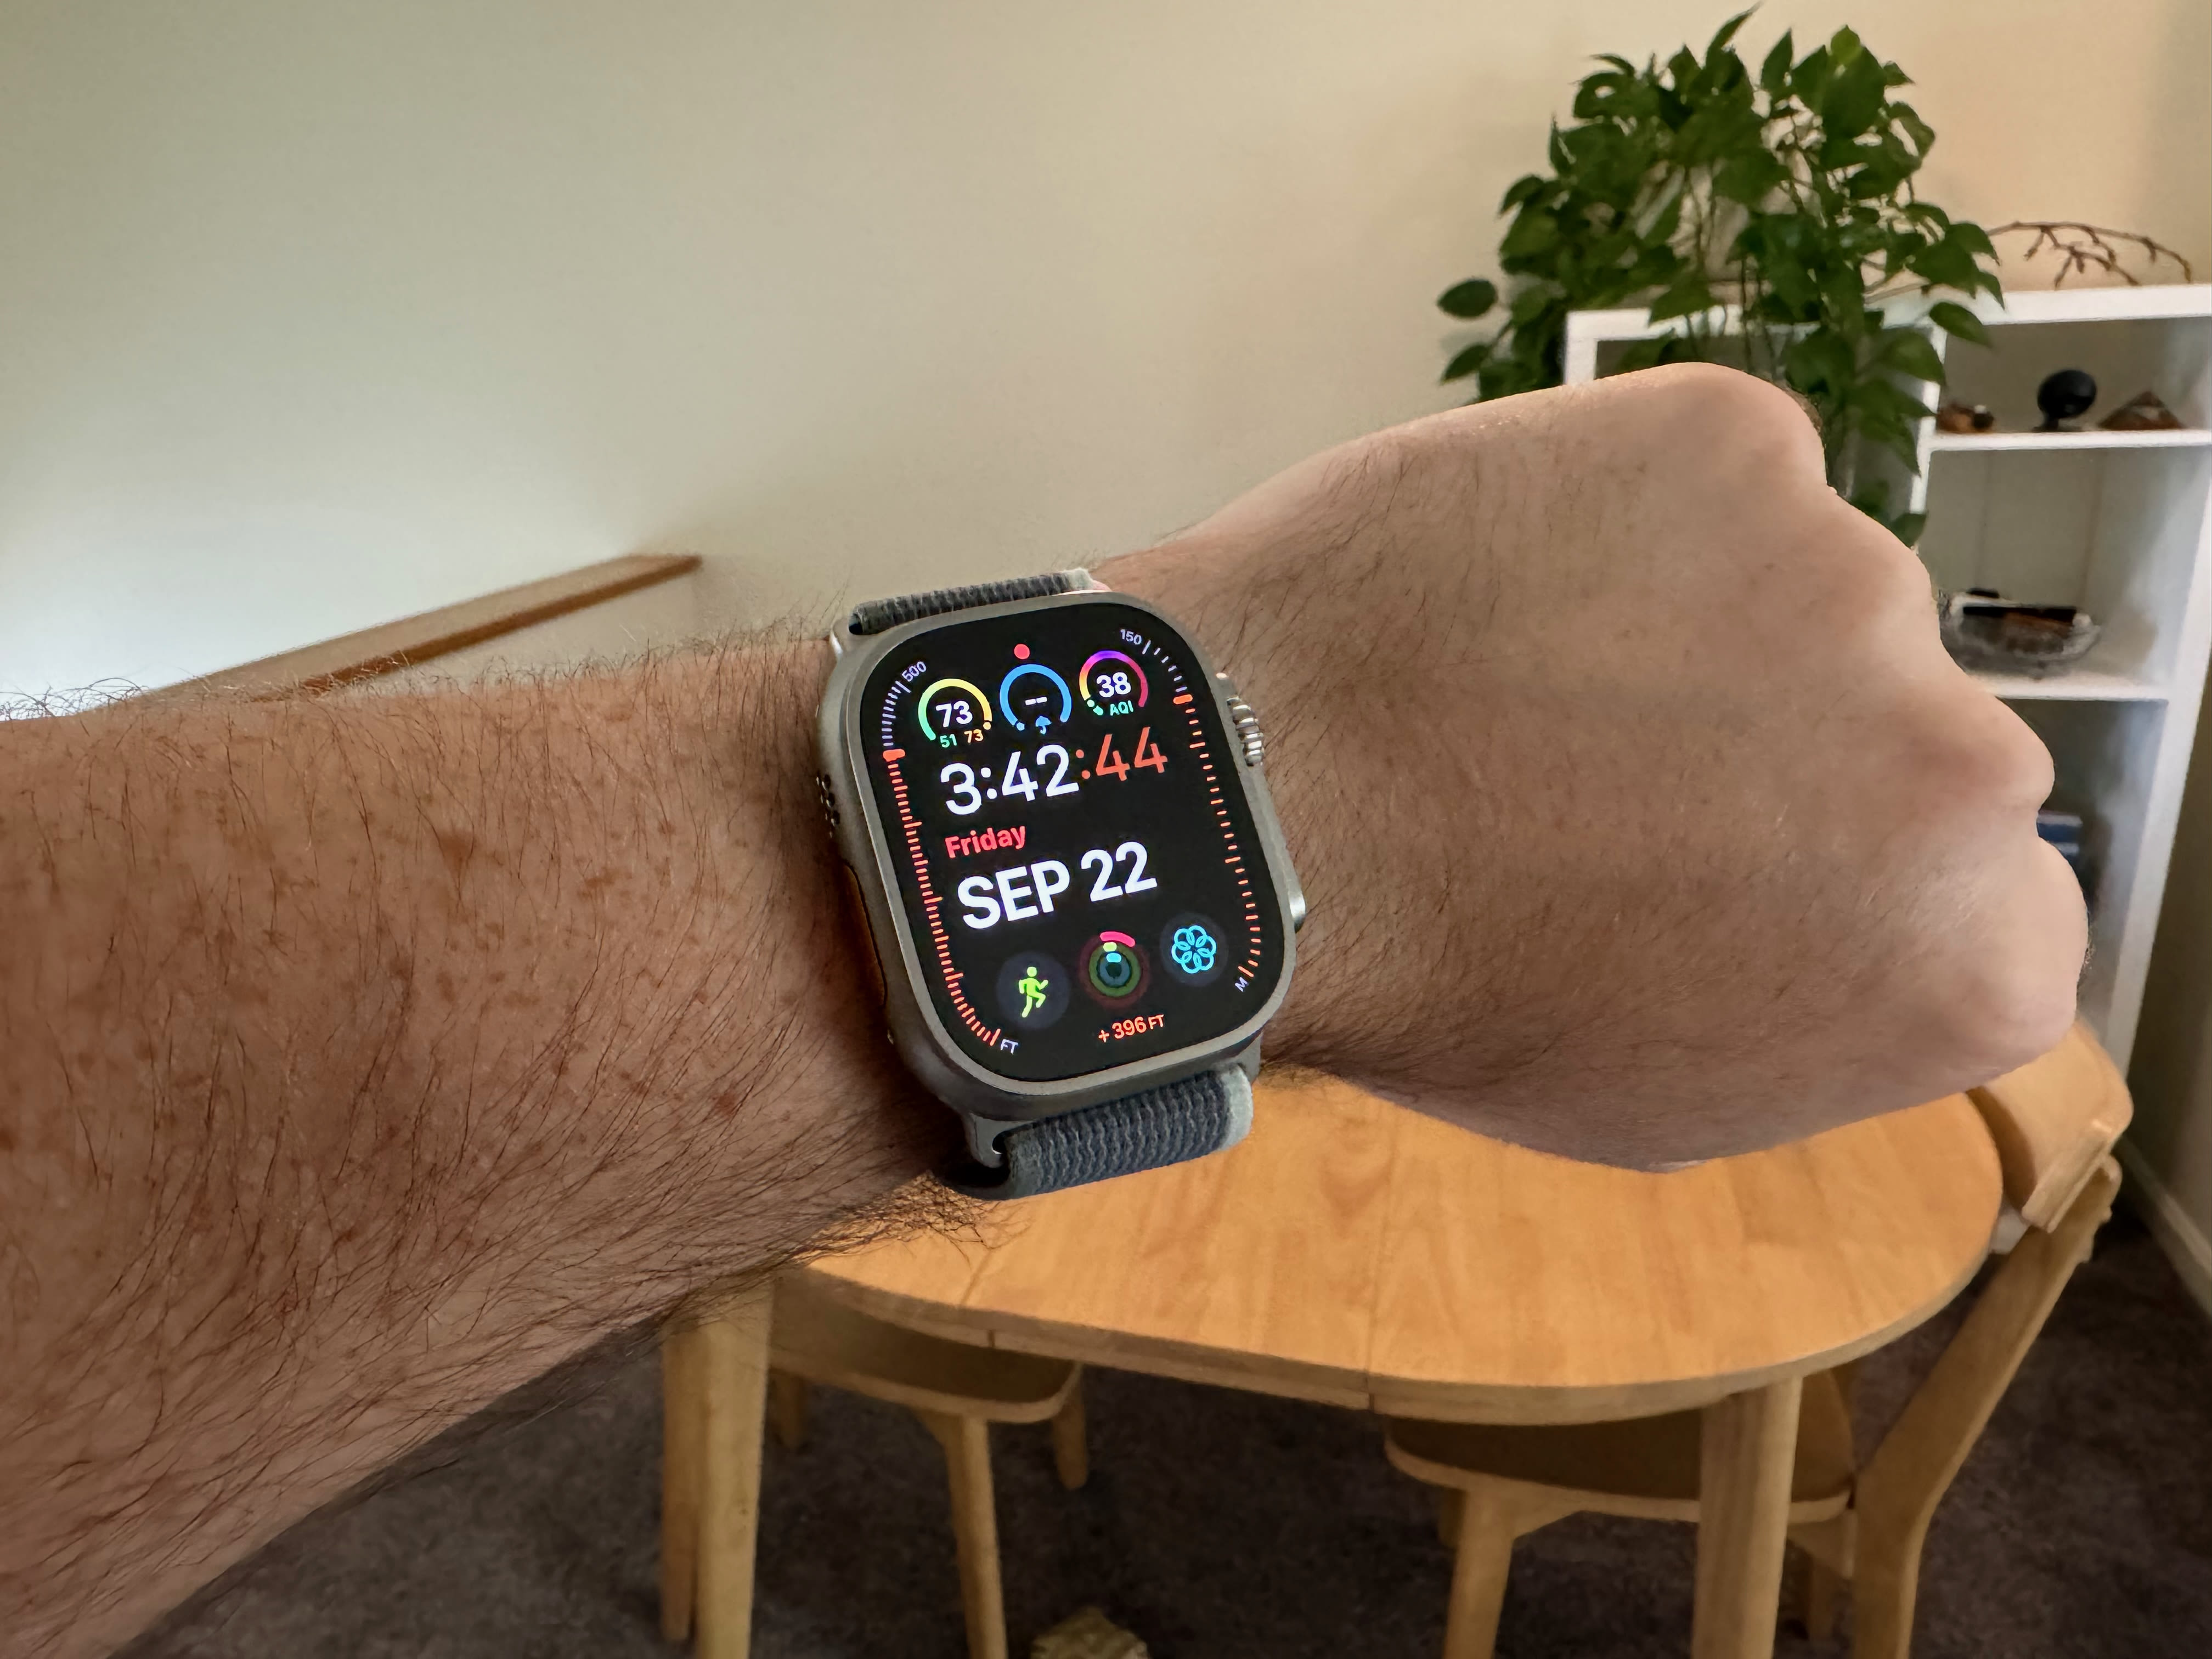 Apple Watch finally lets you monitor blood sugar, but you'll need a Dexcom G7